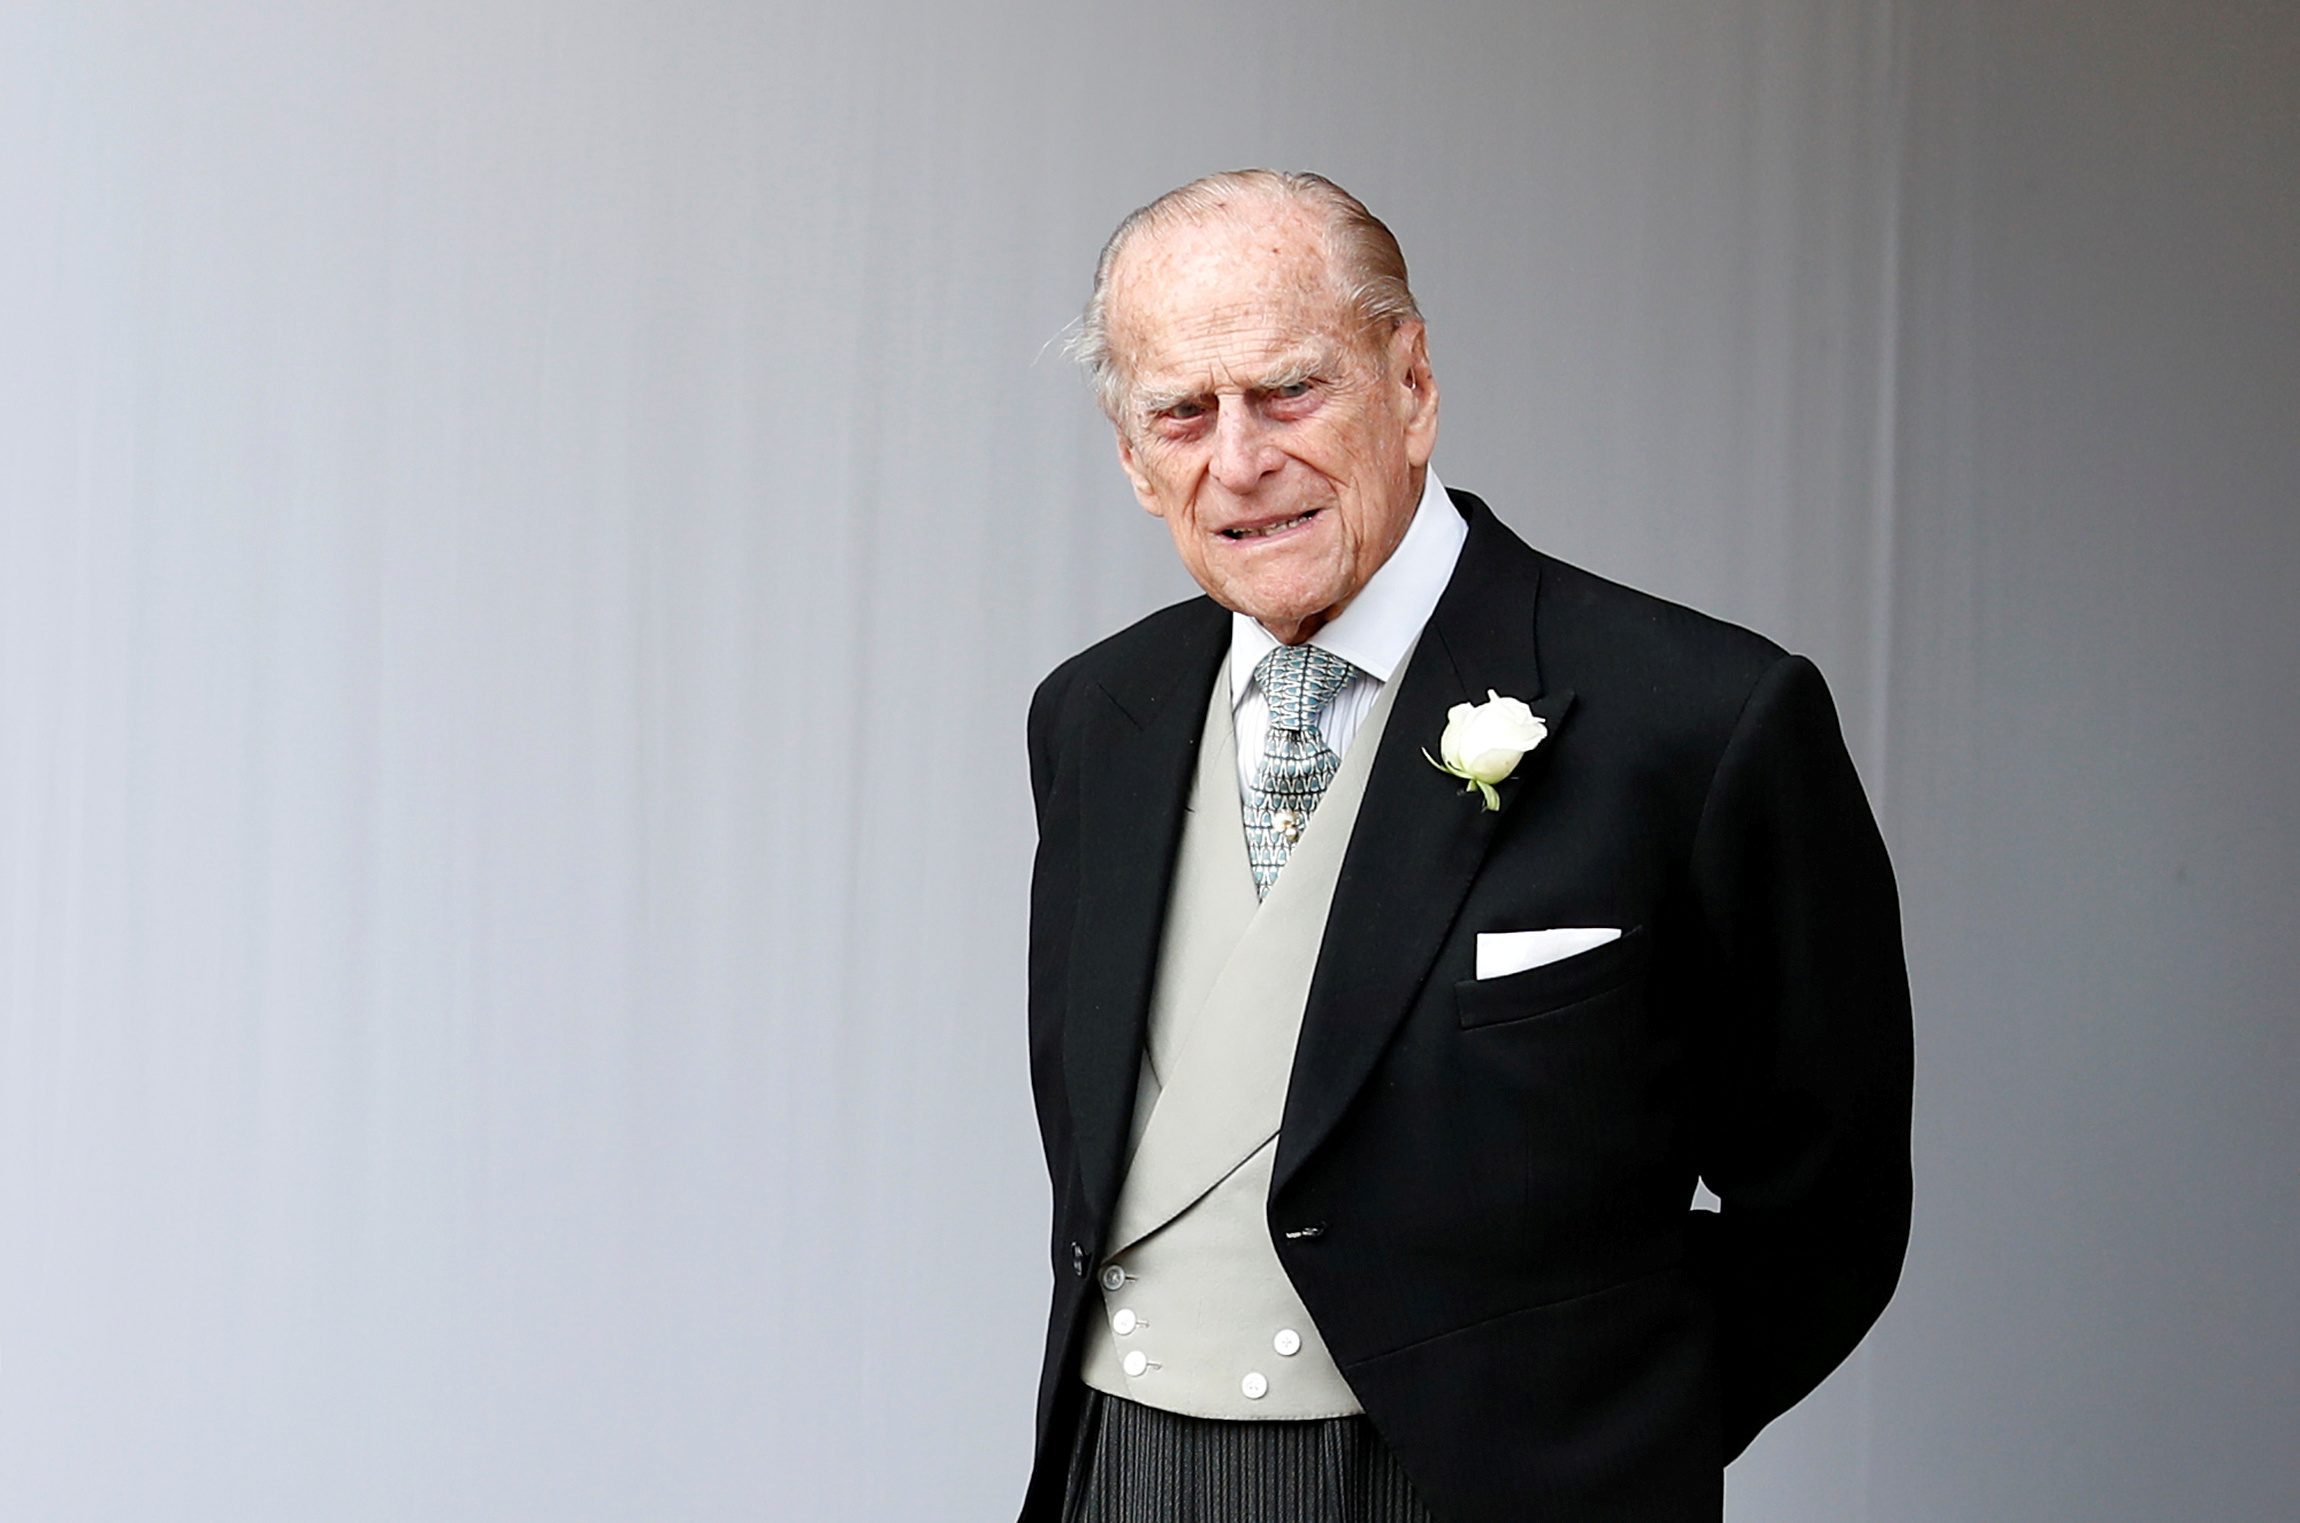 World reacts to death of Britain’s Prince Philip